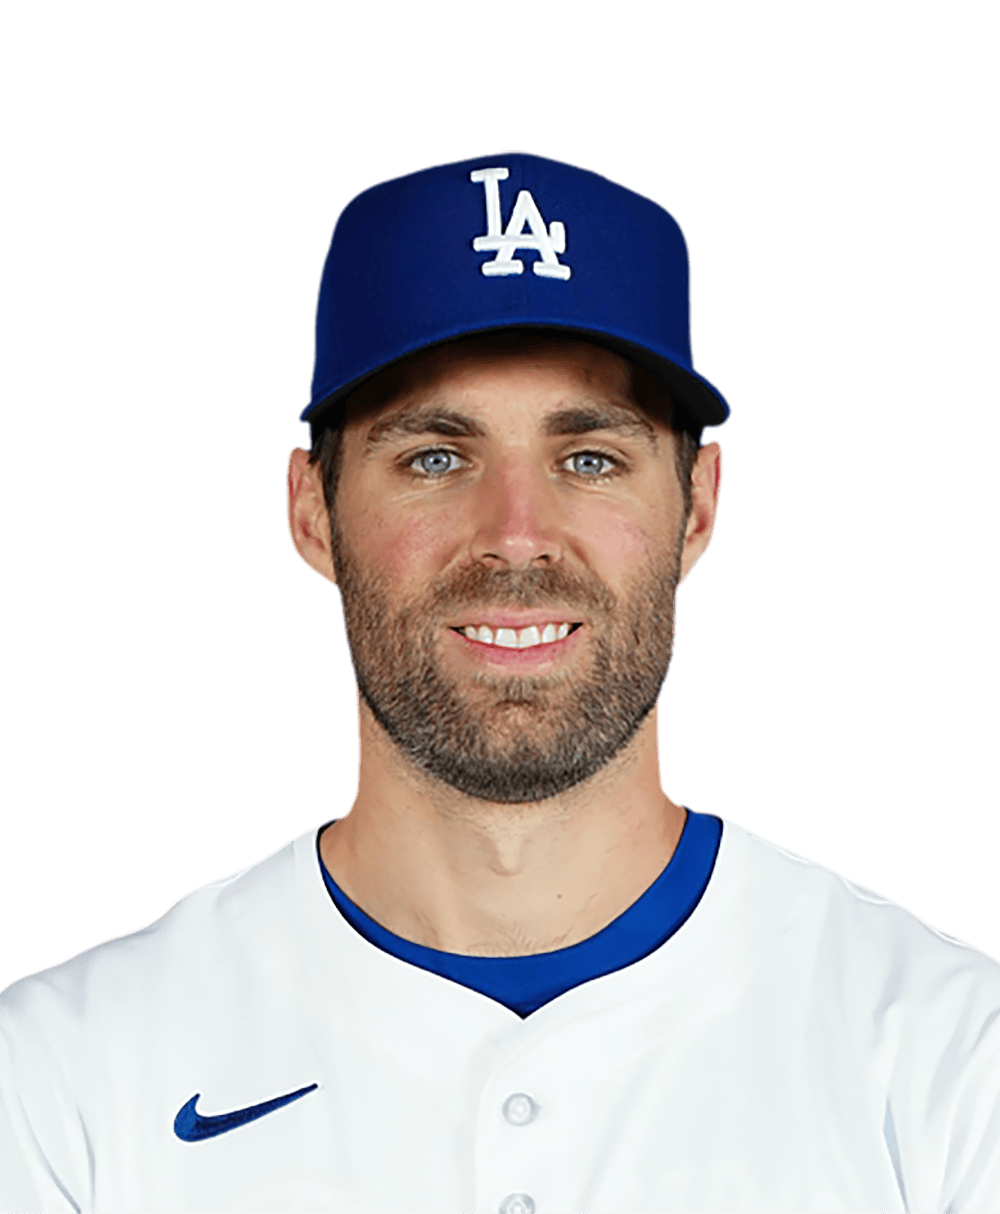 chris taylor dodgers wife